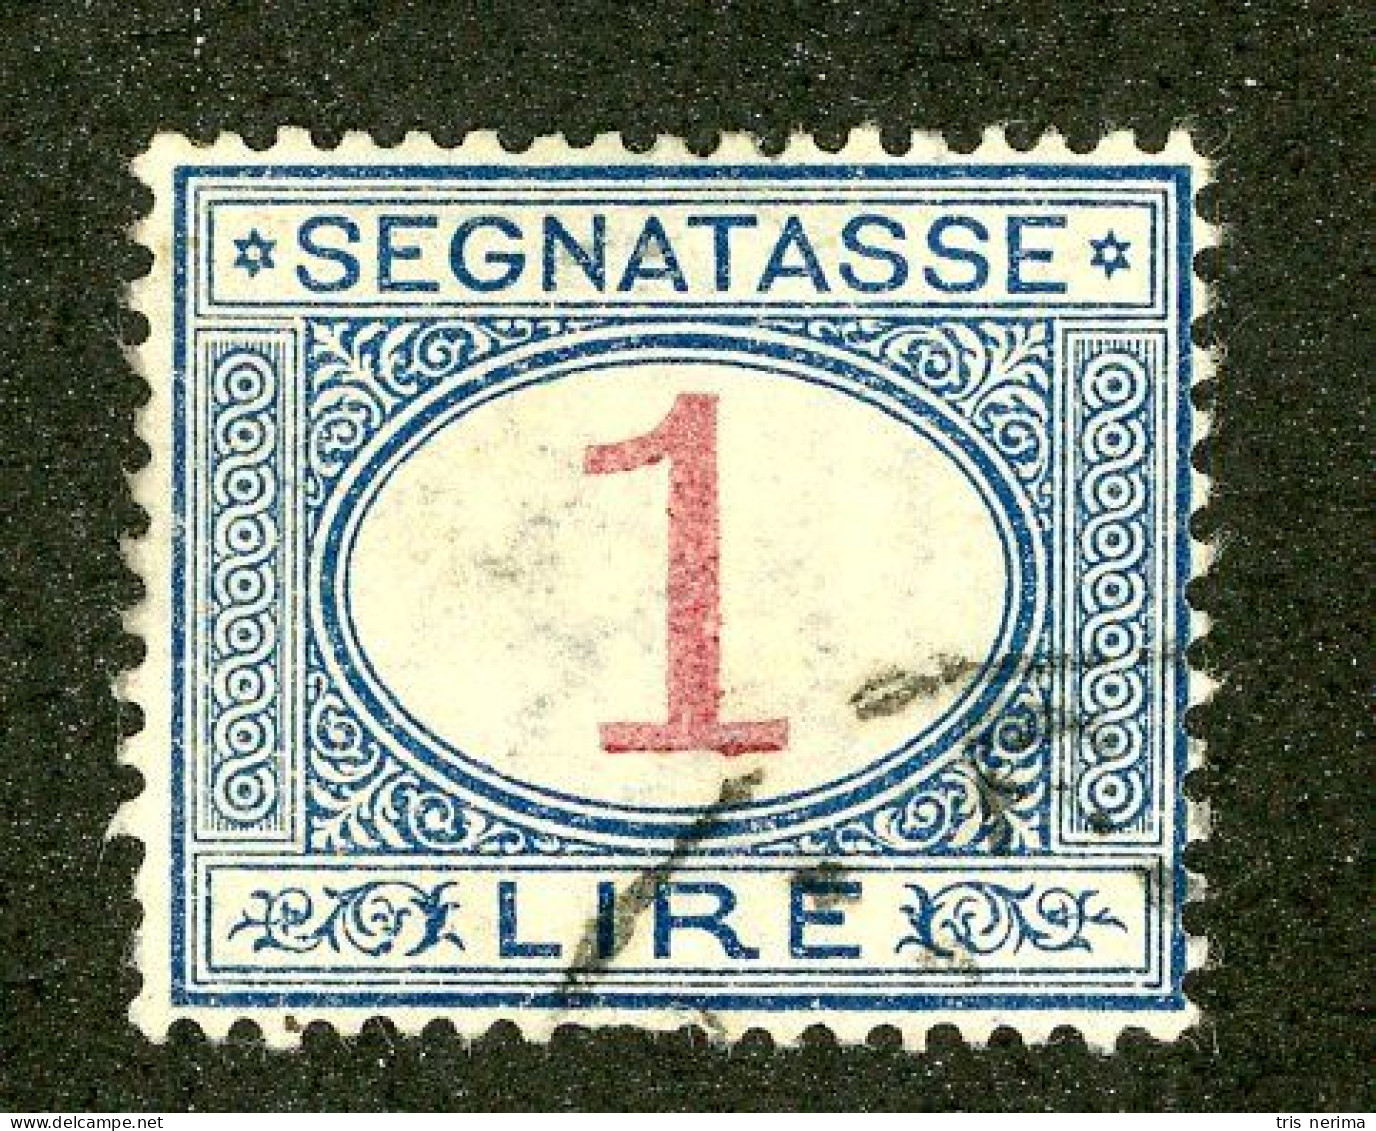 1036 Italy 1894 Scott #J14 Used (Lower Bids 20% Off) - Postage Due